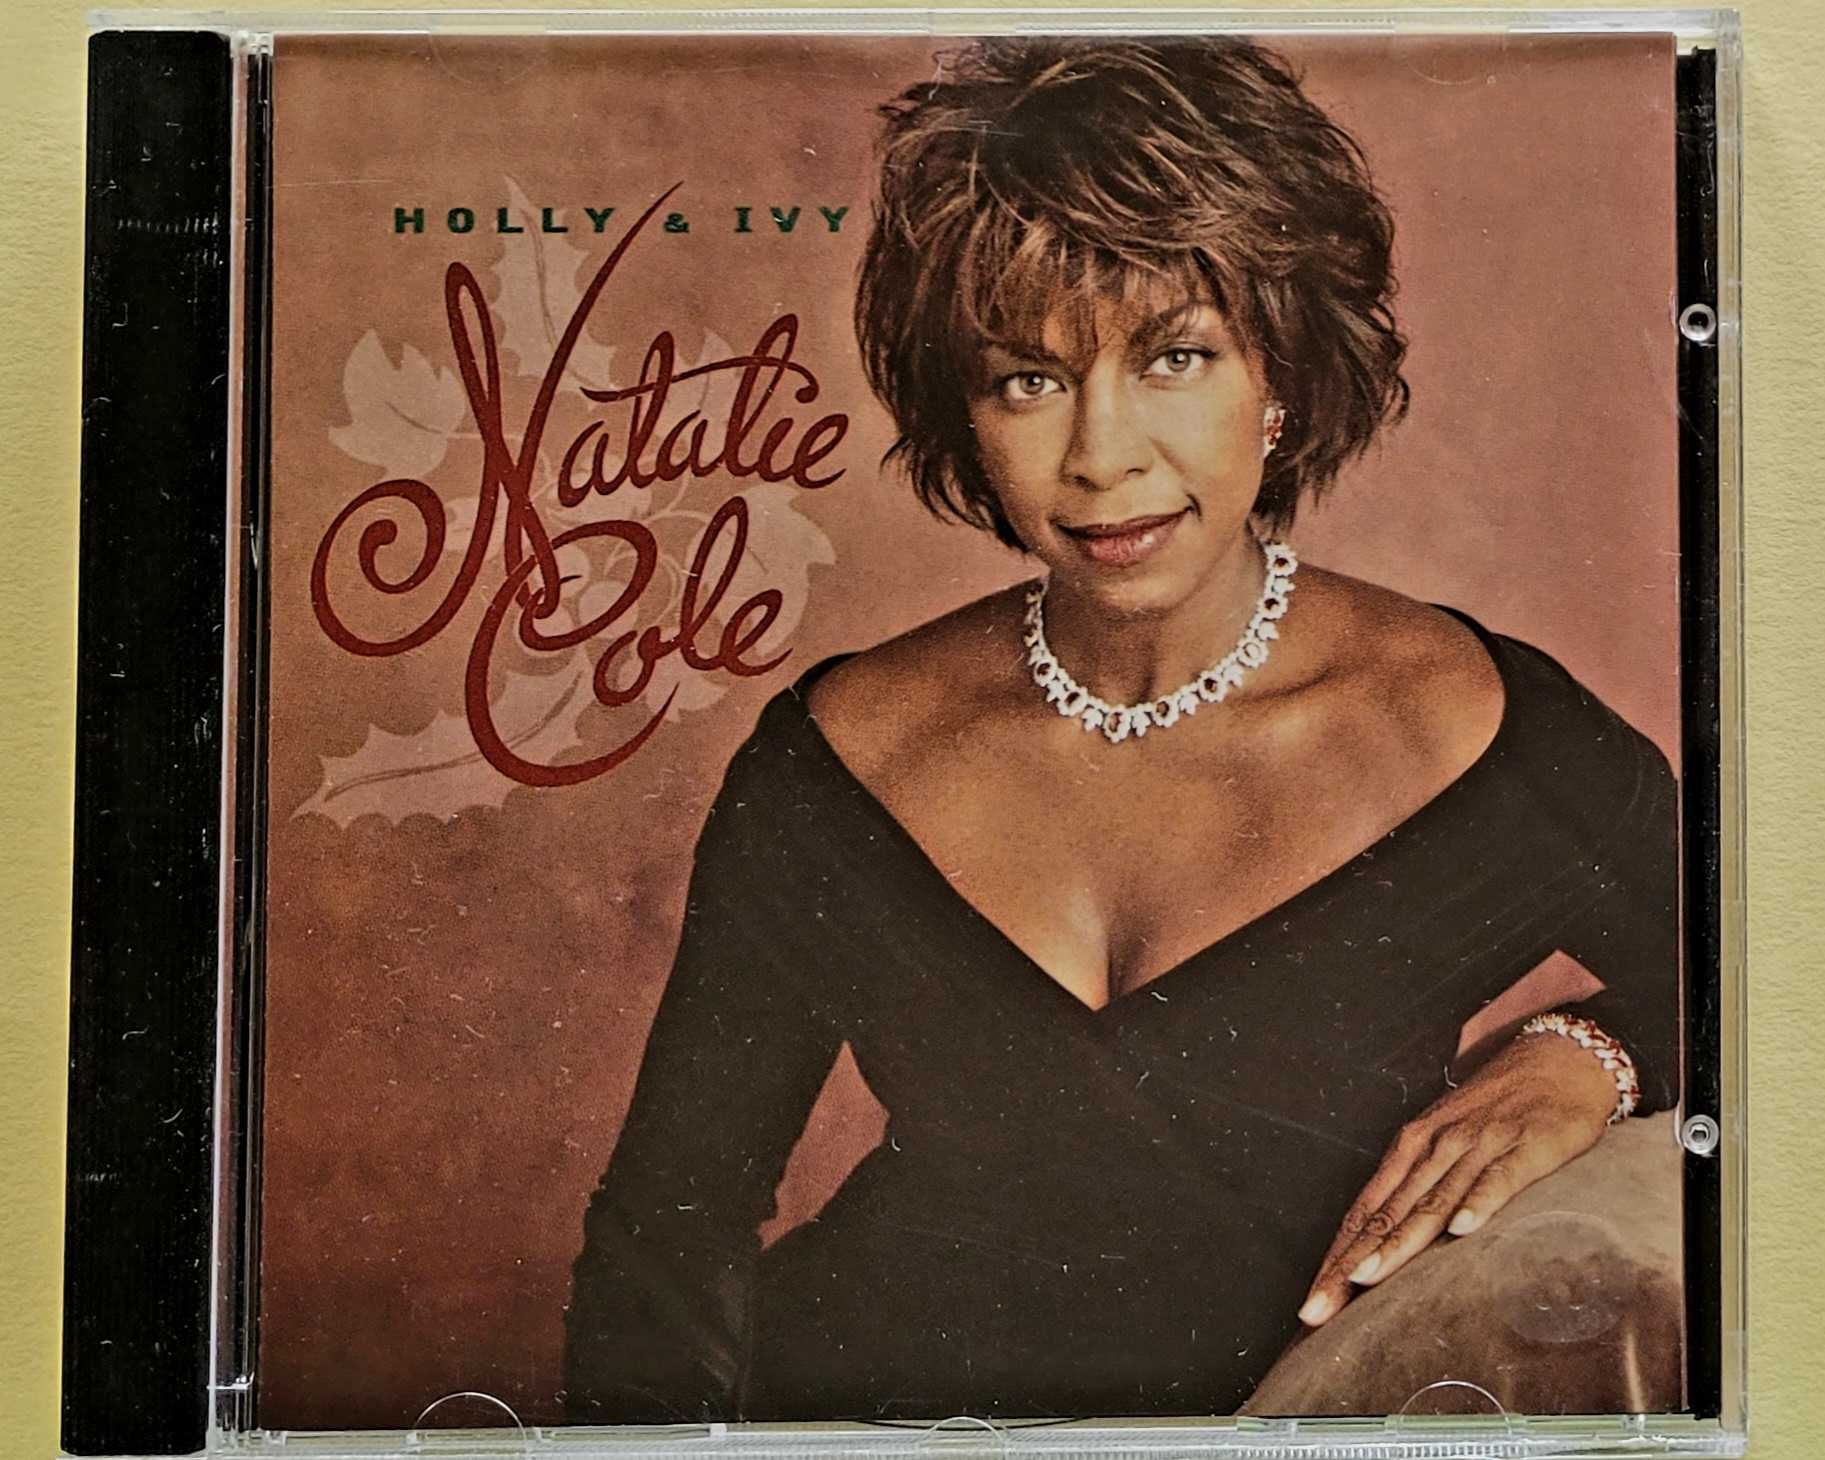 CD Natalie Cole /Holly & Ivy